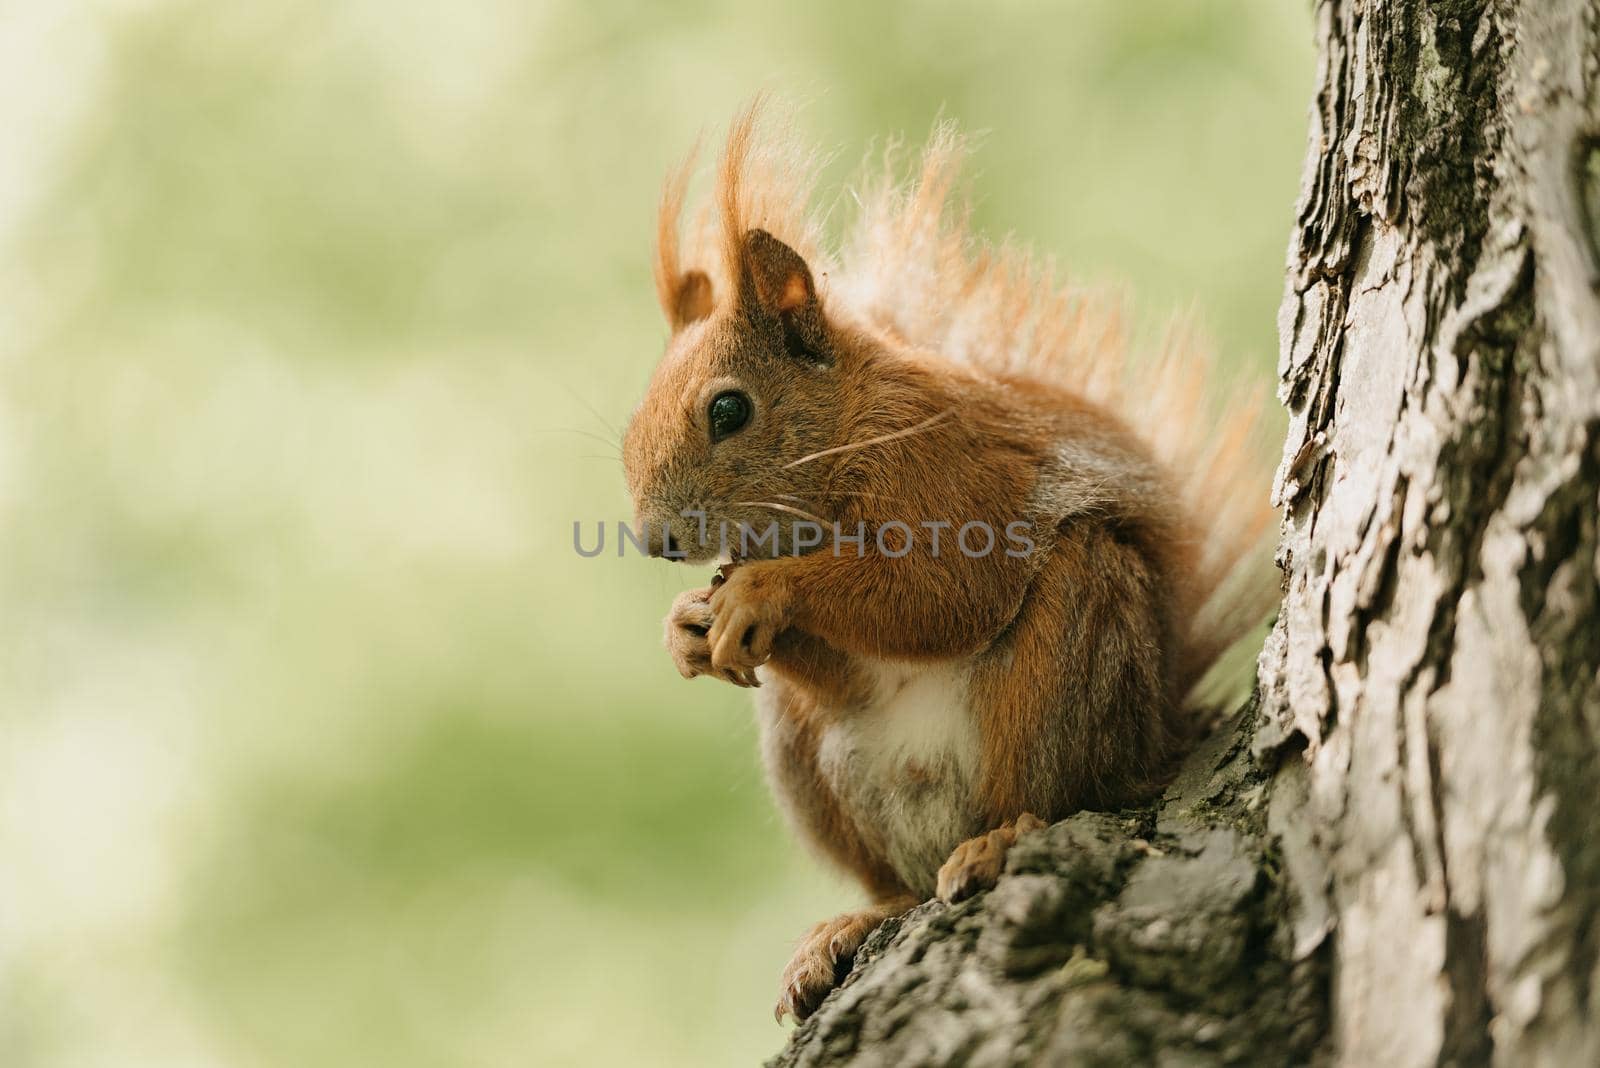 The red fluffy squirrel is eating a nut on the branch of the tree in the Royal Baths Park, Lazienki Park